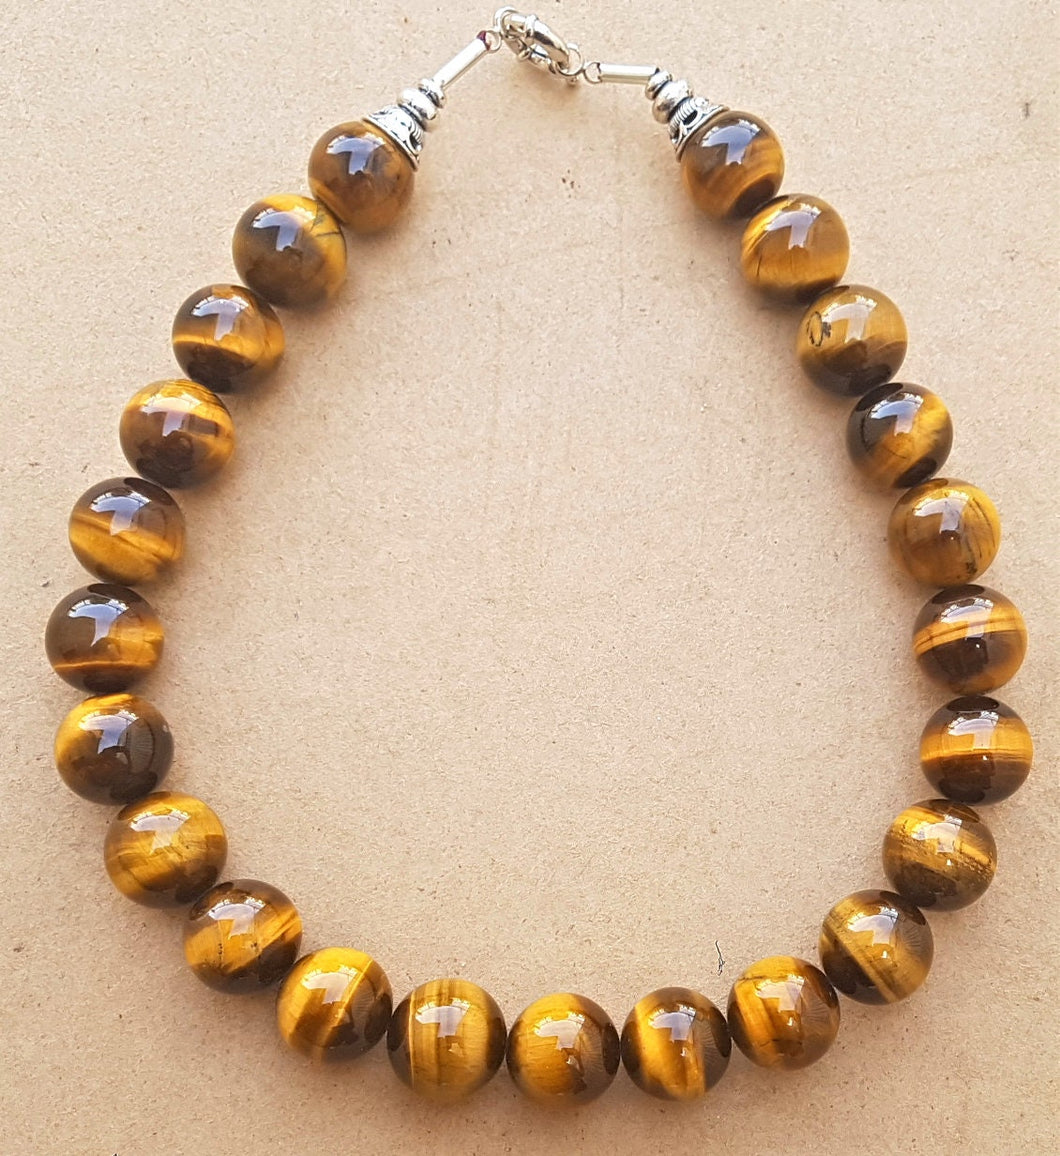 Yellow amber necklace- Amber Gemstone necklace.Semi precious Jewelry.Handmade  Necklace.Mountain agate necklace.Bohemian Bead Necklace.